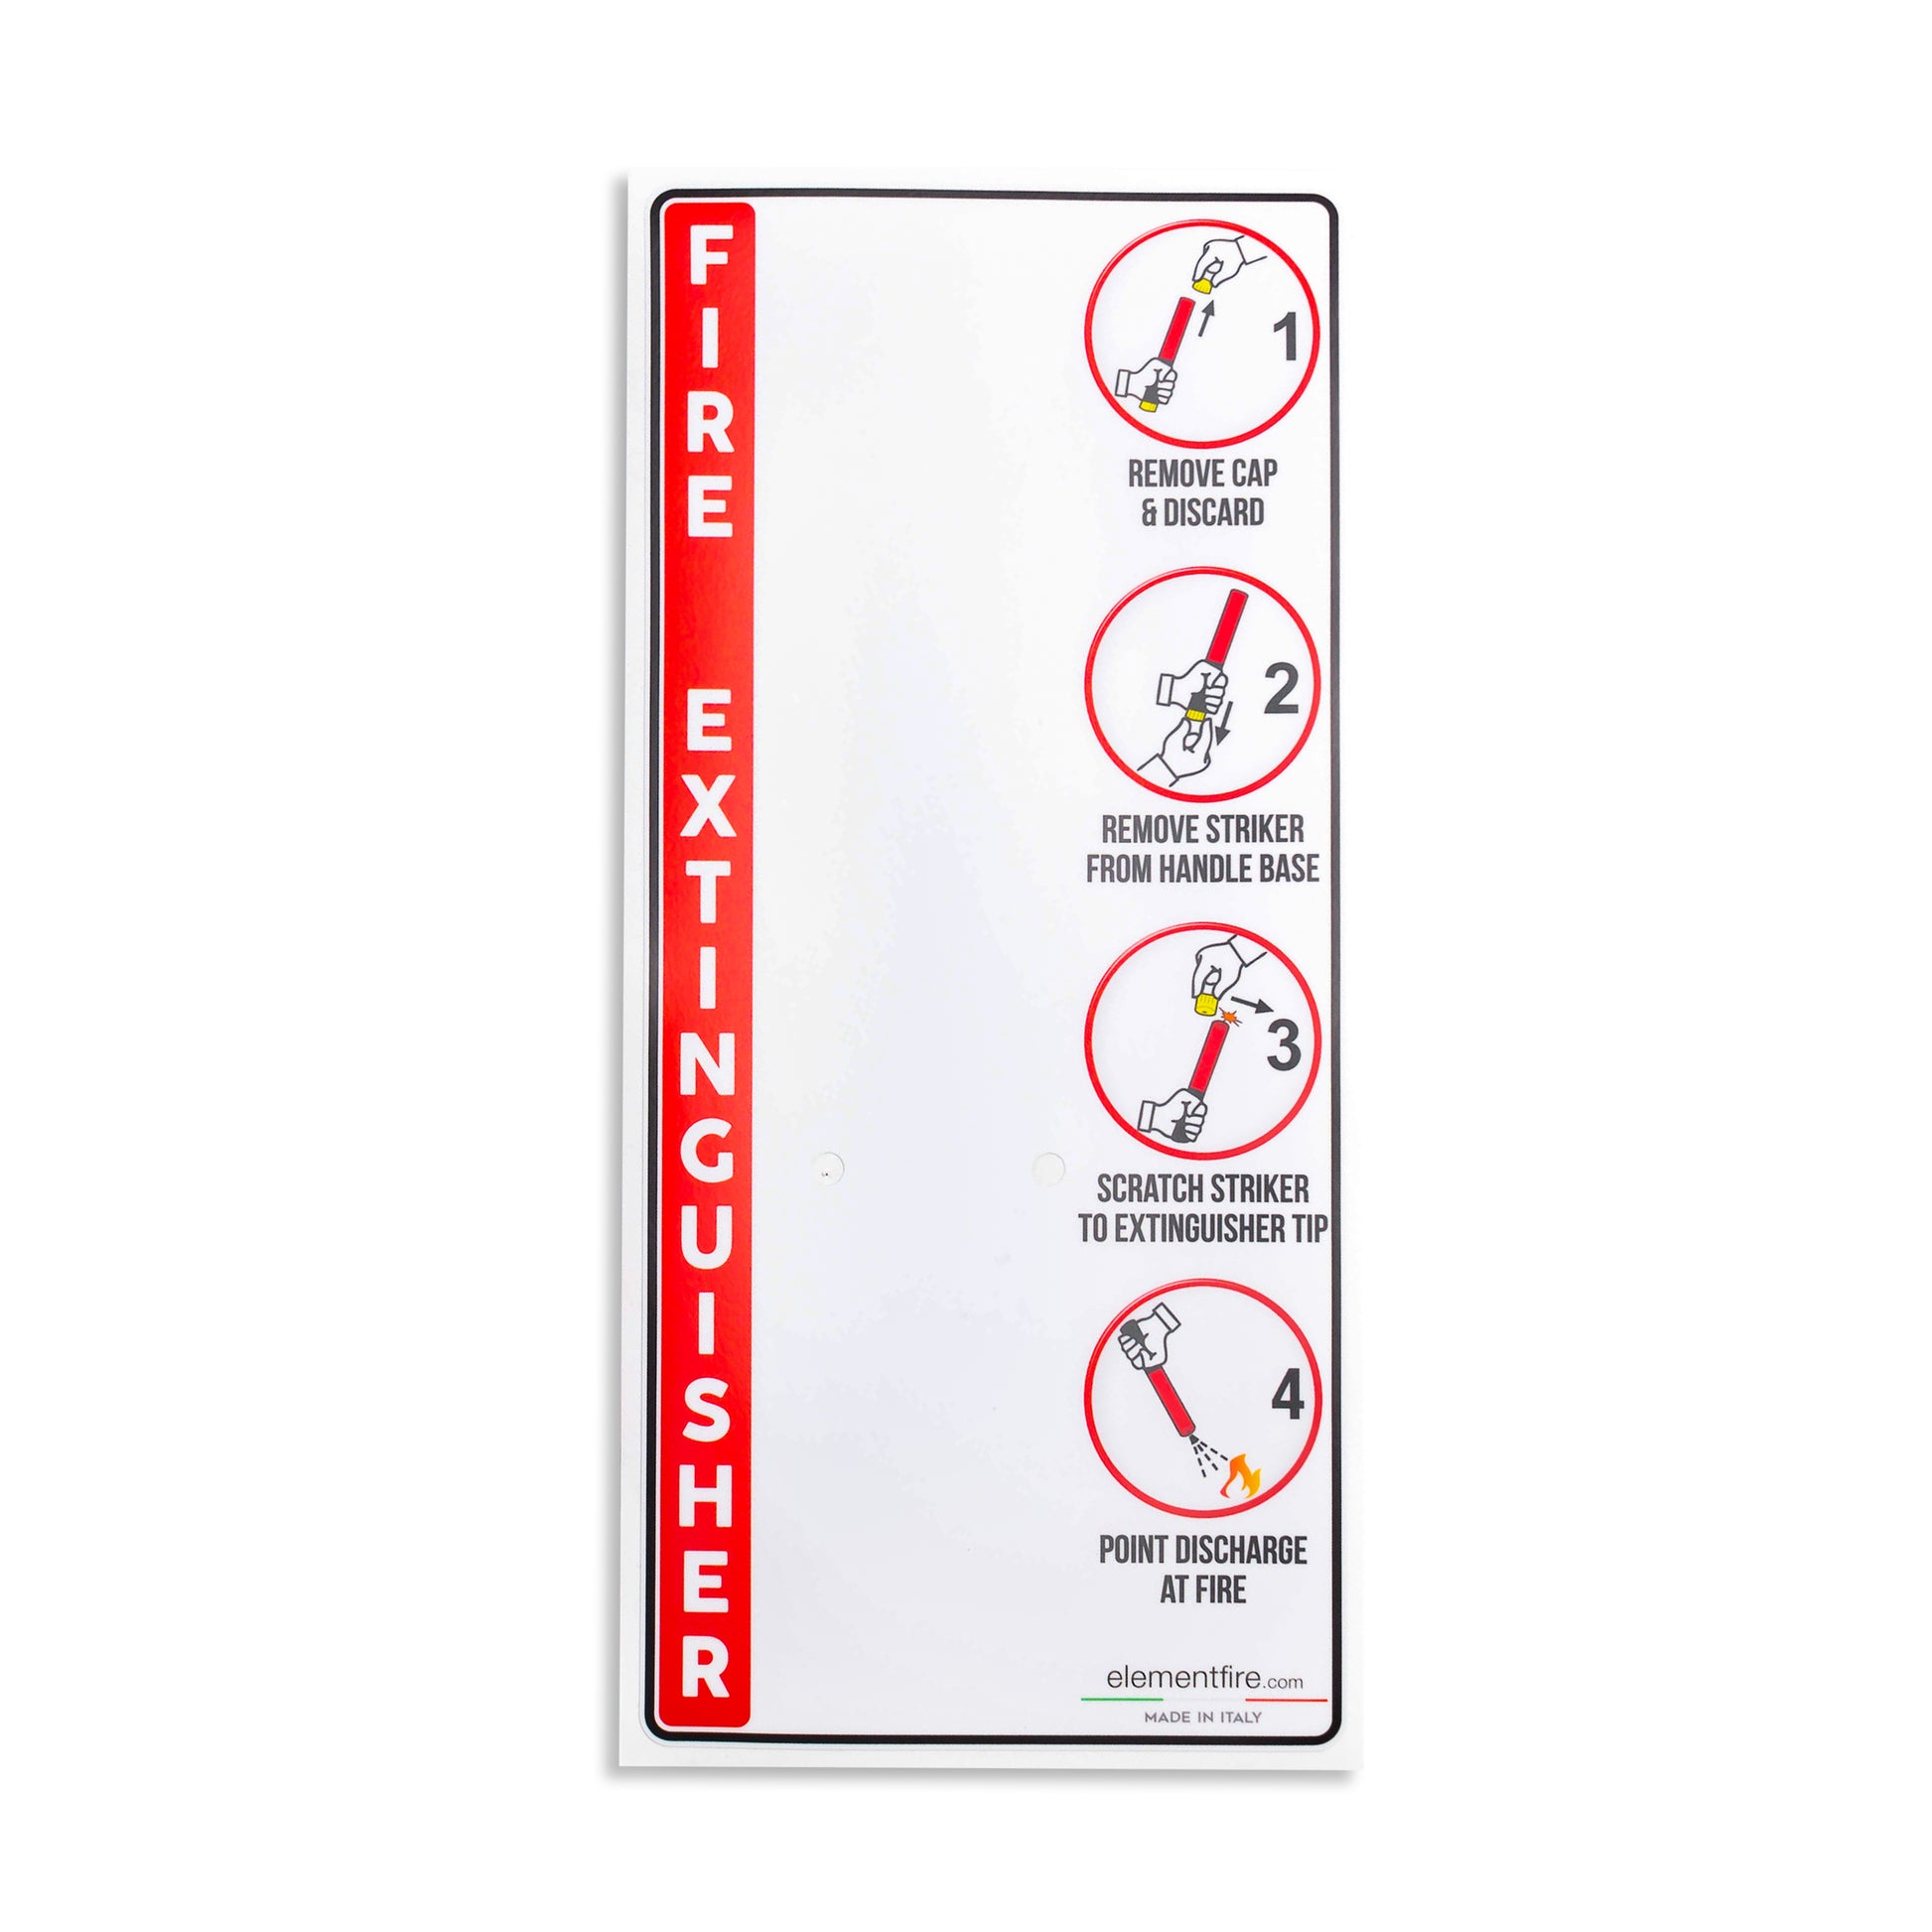 Fire Extinguisher Wall Mount Decal